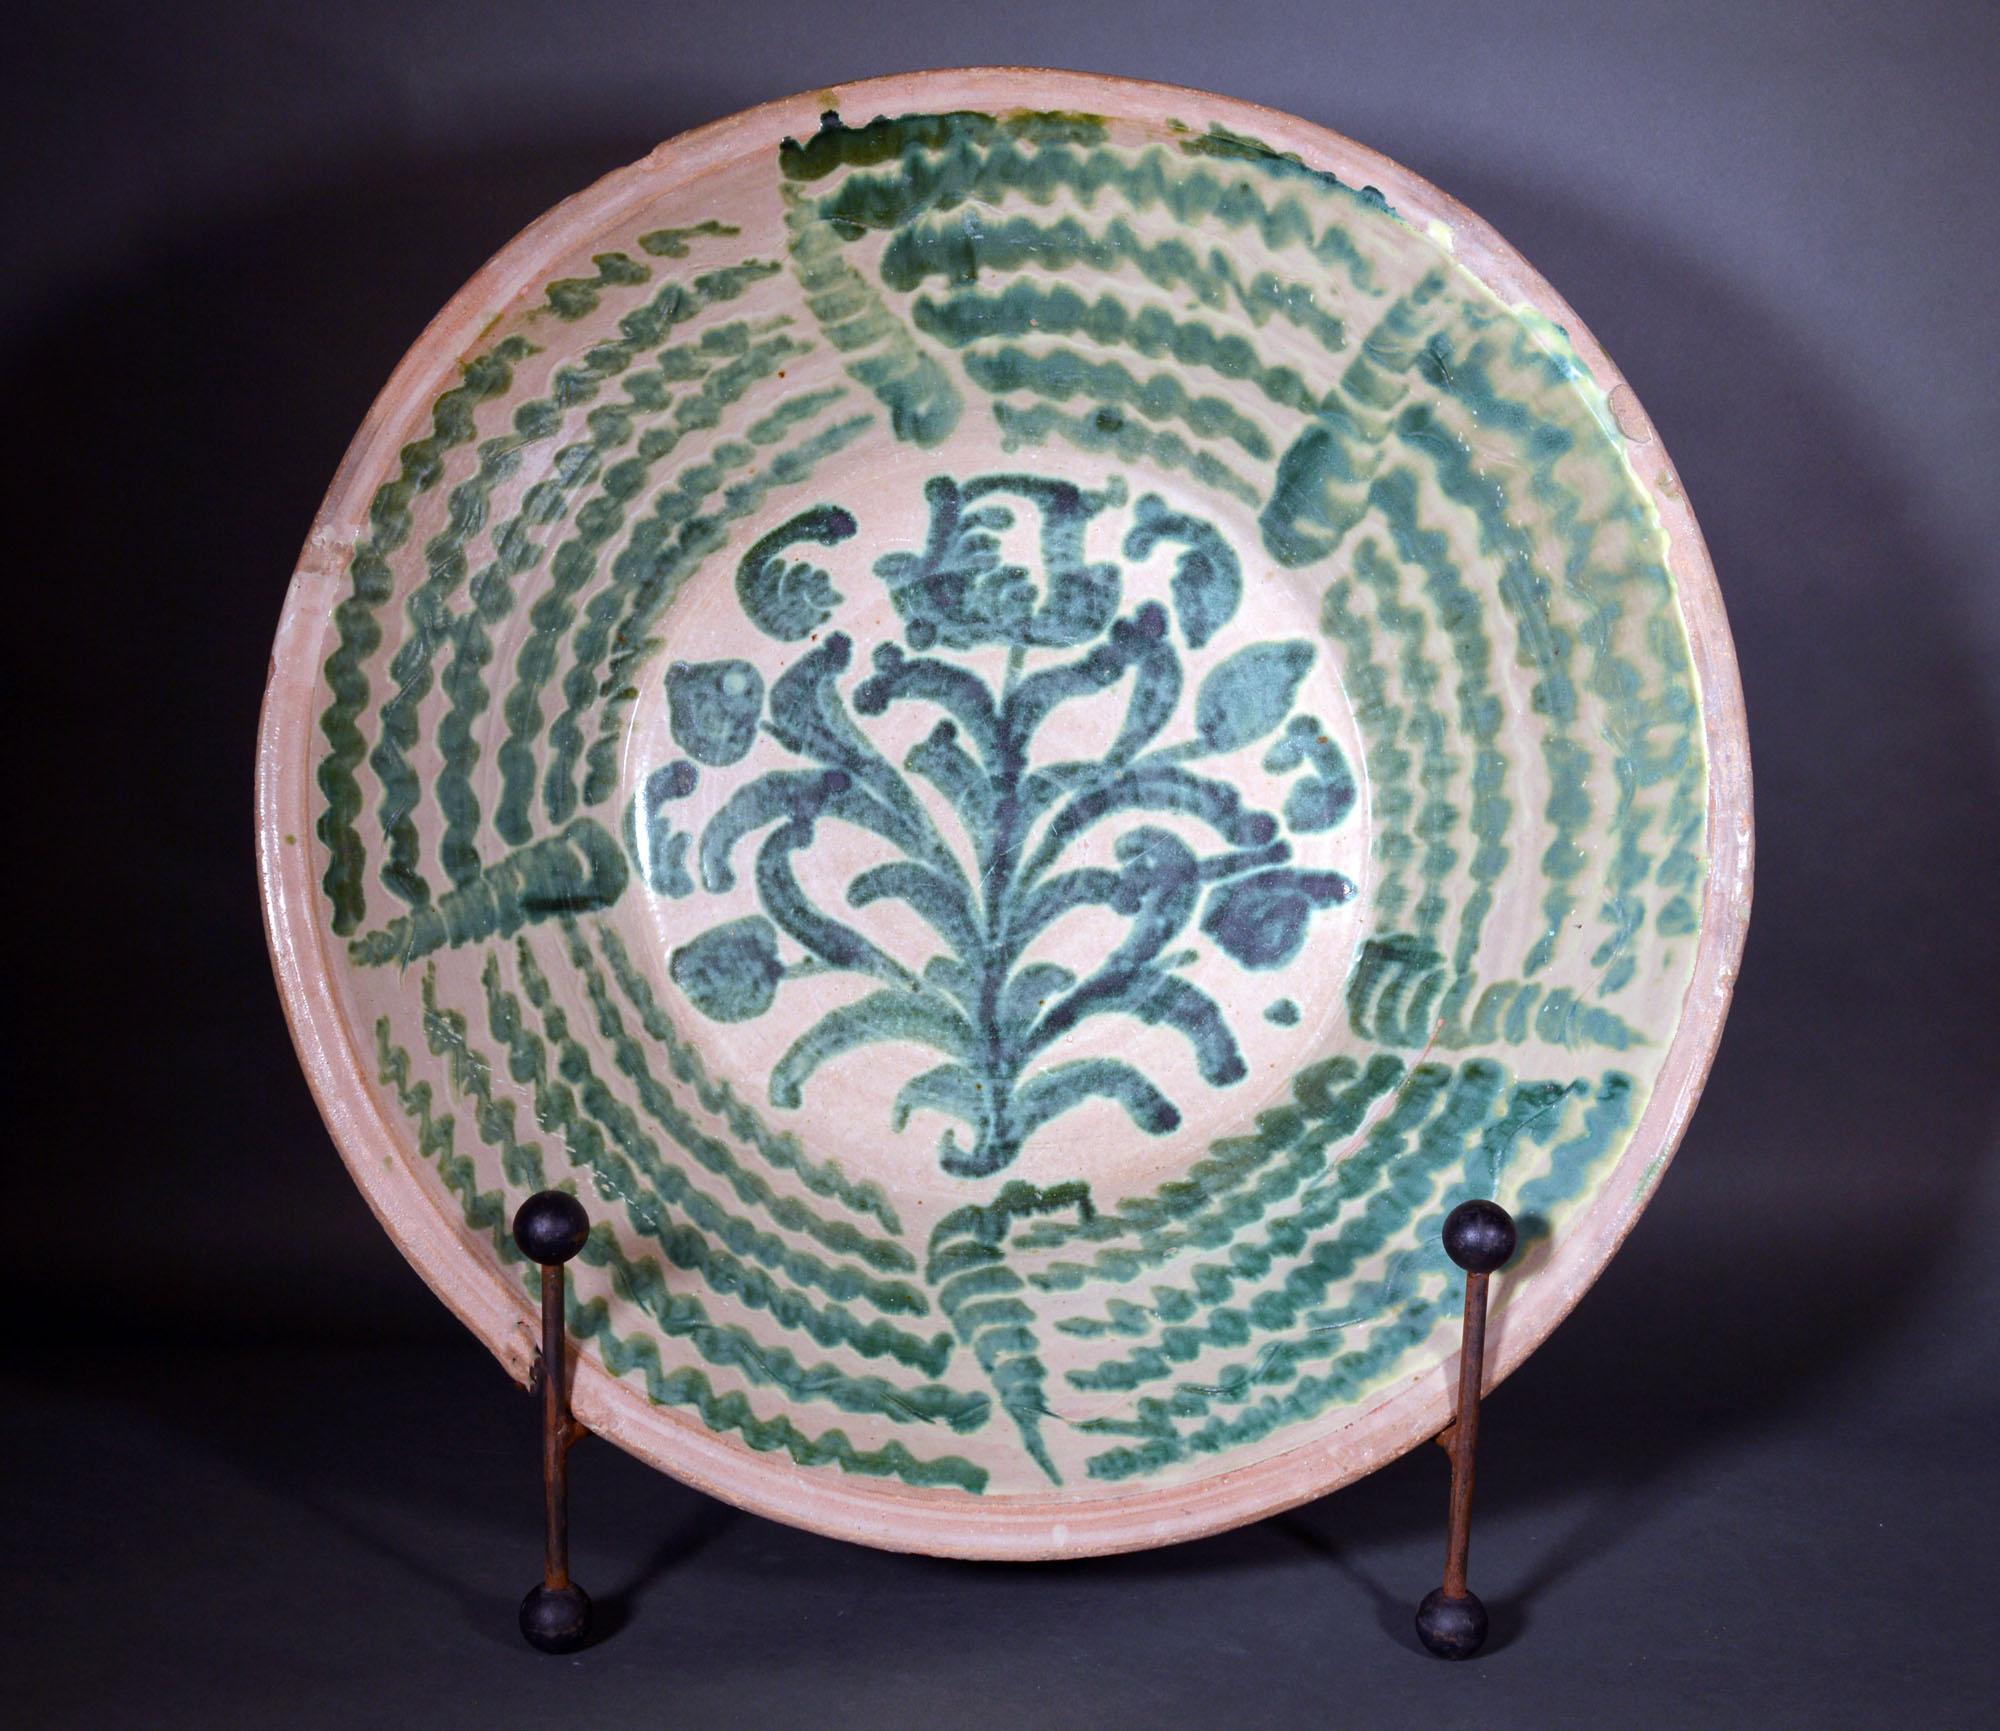 Spanish tin-glazed earthenware pottery oversized basin or lebrillo,
Fajalauza, Granada,
19th century


The massive circular deep circular basin or Librillo with slightly flaring sides is glazed and robustly decorated on the interior with green